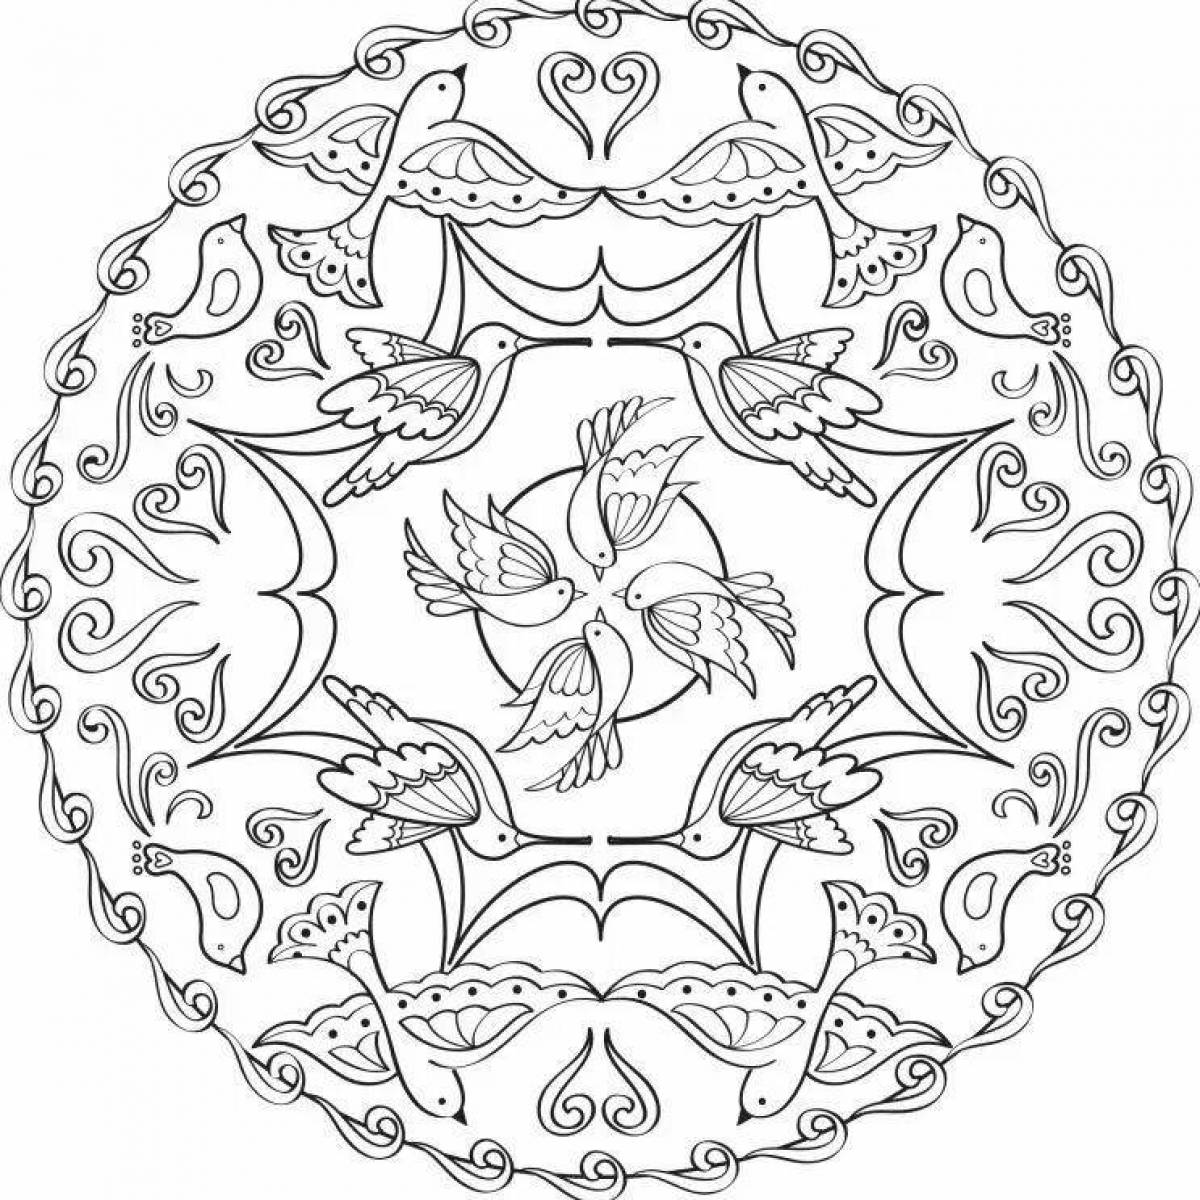 Refreshing mantra coloring pages